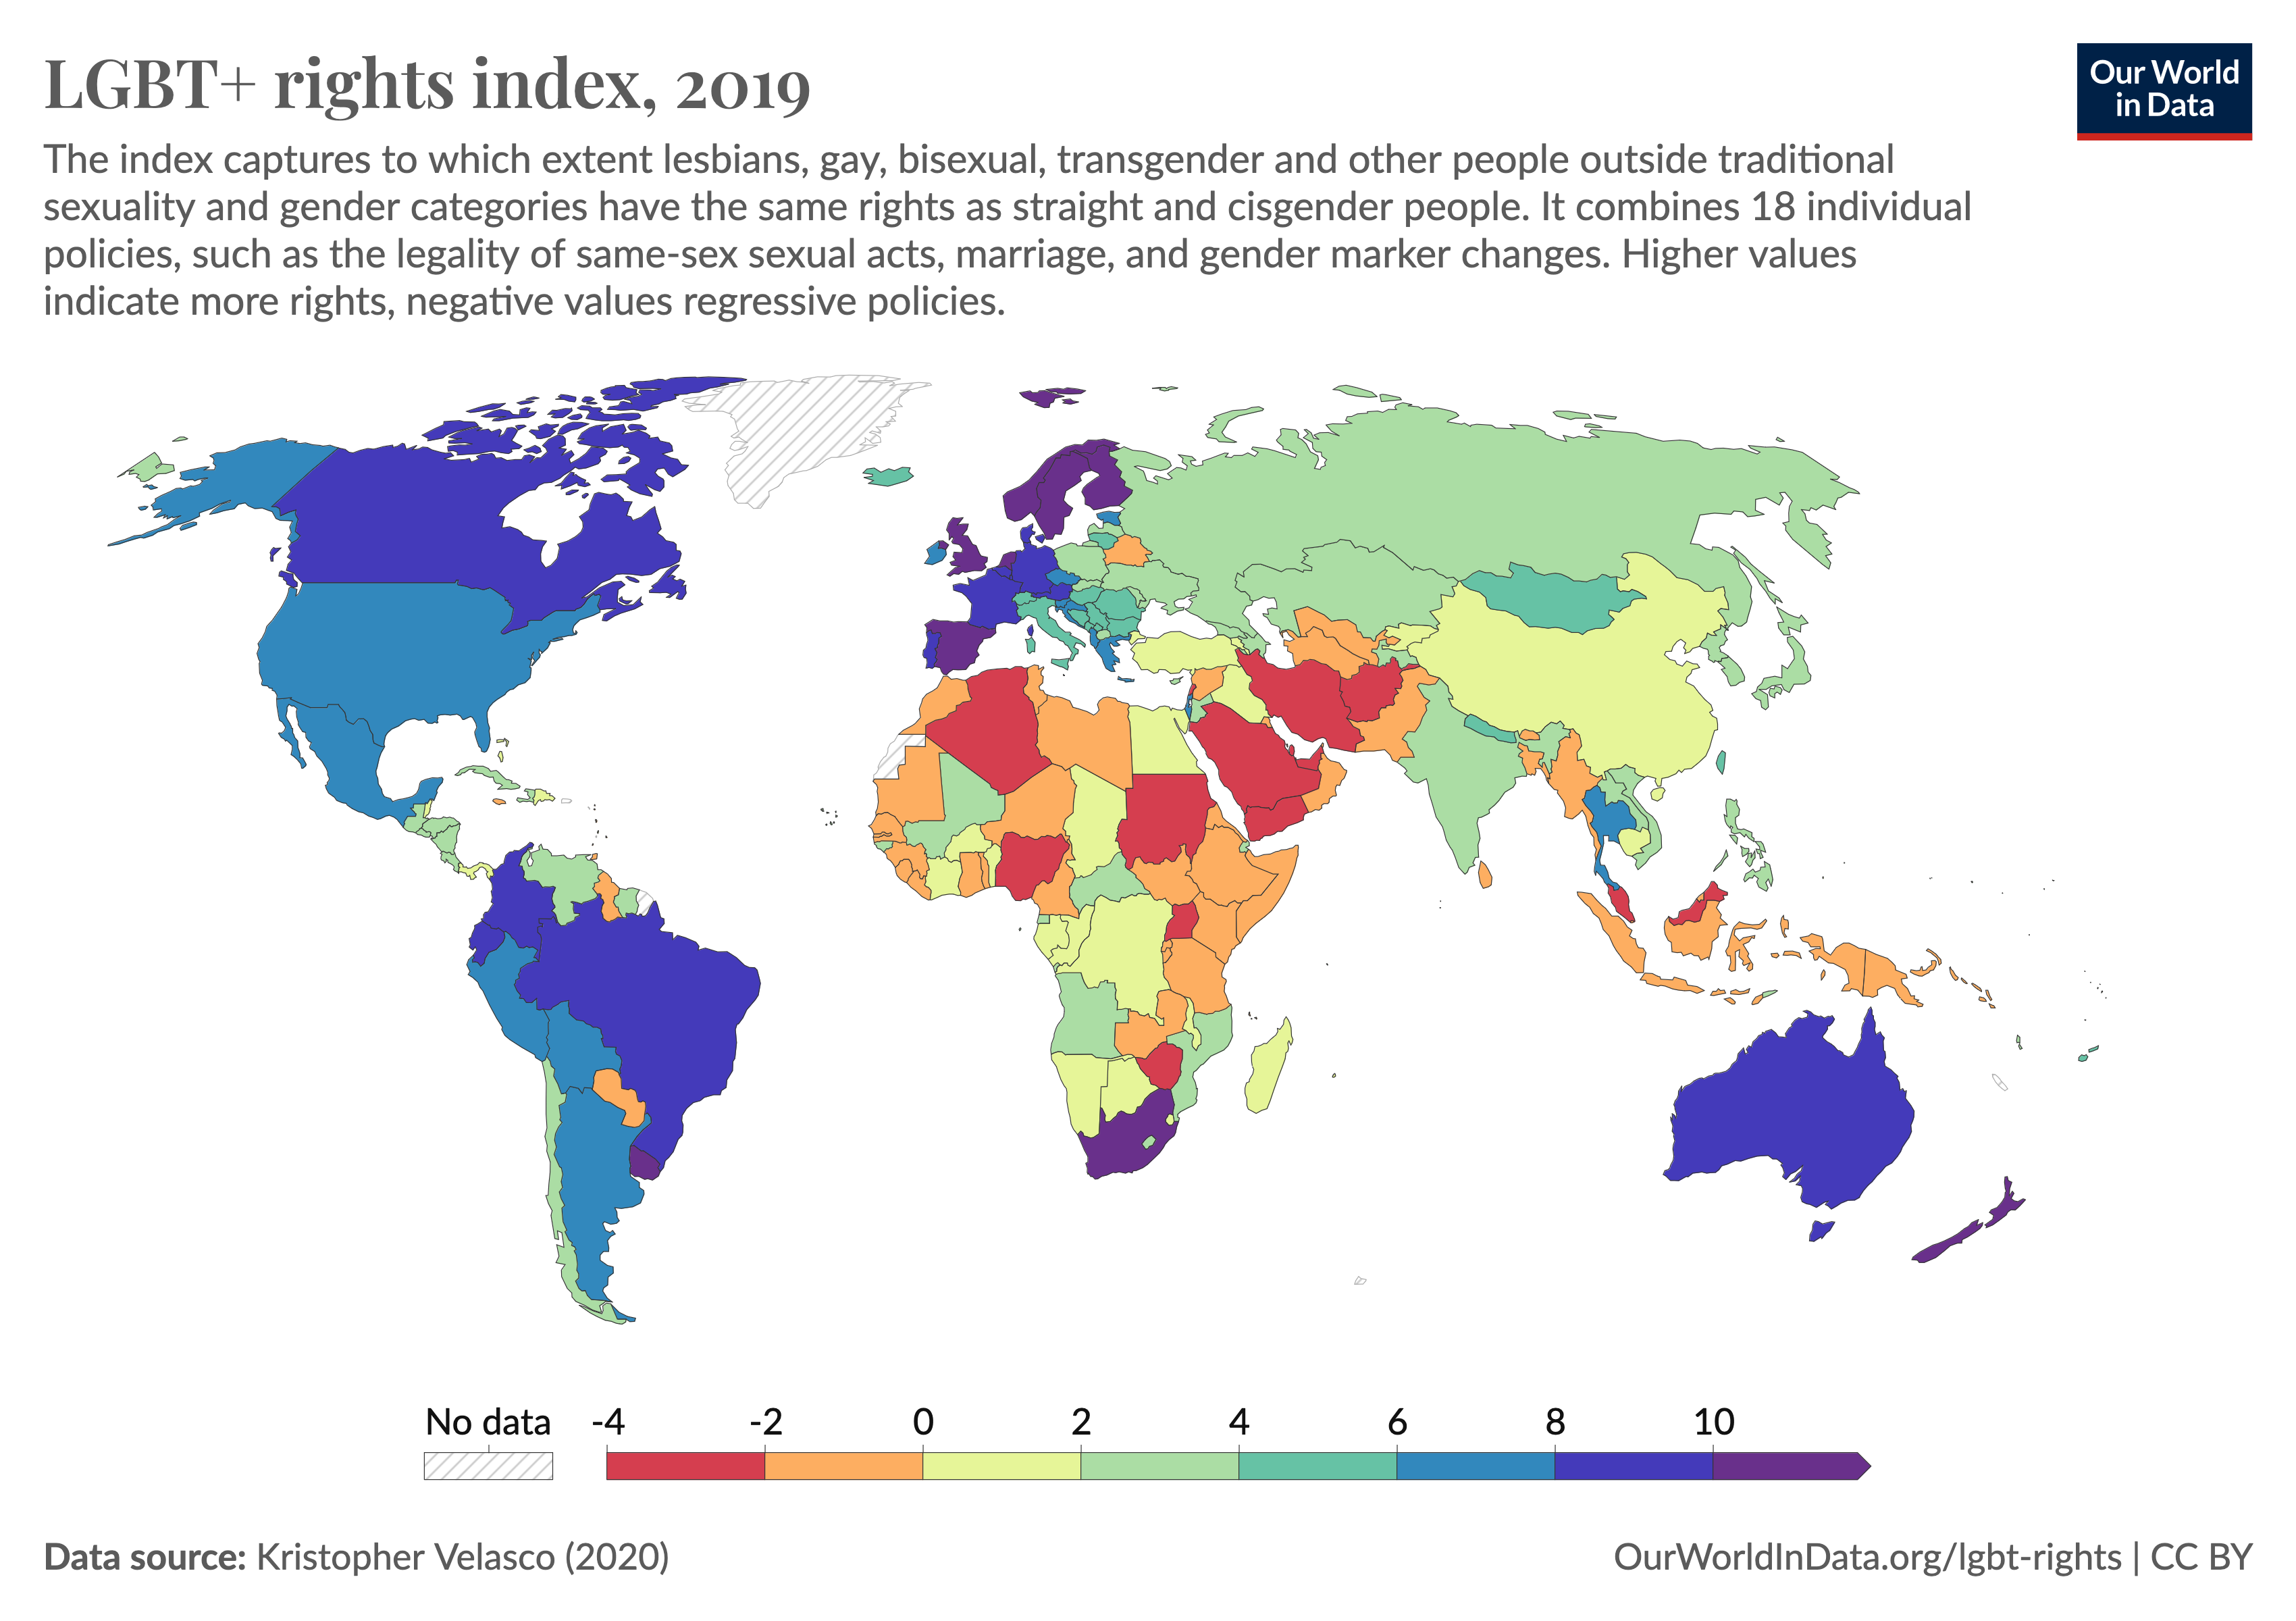 Map showing a map of the LGBT+ rights index for 2019, which combines information on policies such as the legality of same-sex sexual acts, marriage, and gender marker changes to show that LGBT+ rights vary a lot across countries.